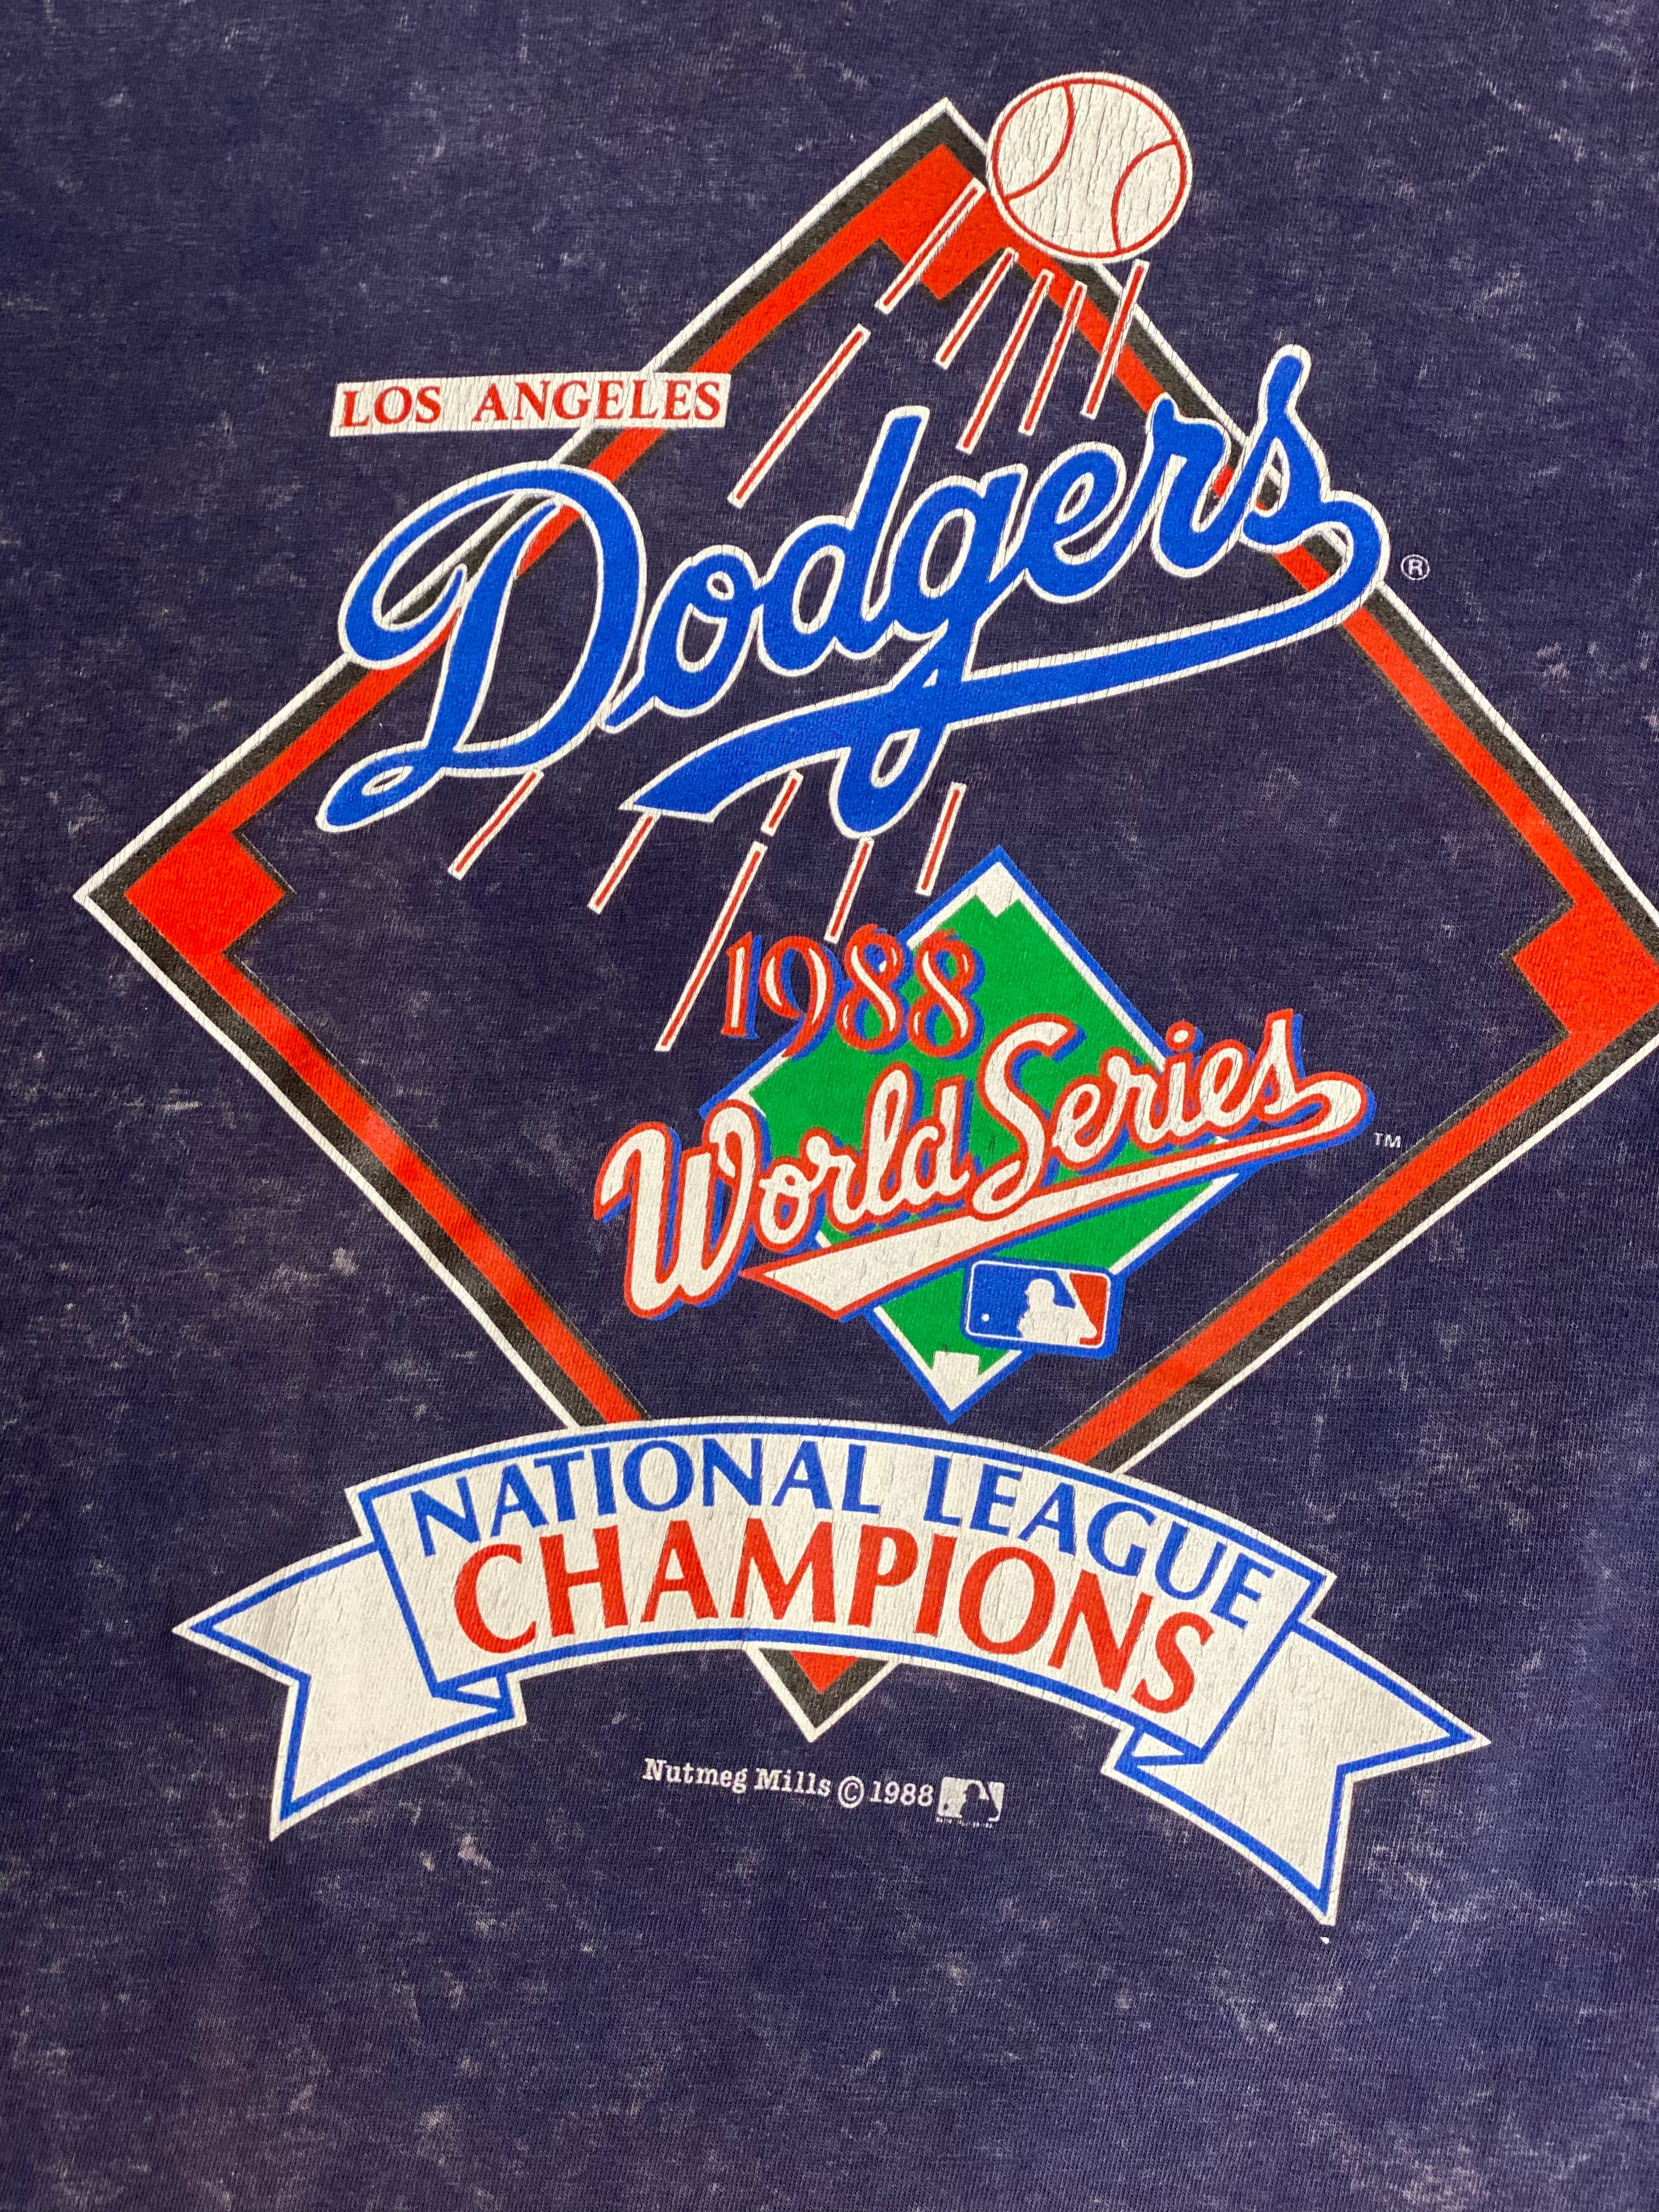 "1988 Dodgers World Series" Limited Edition Vintage T-Shirt